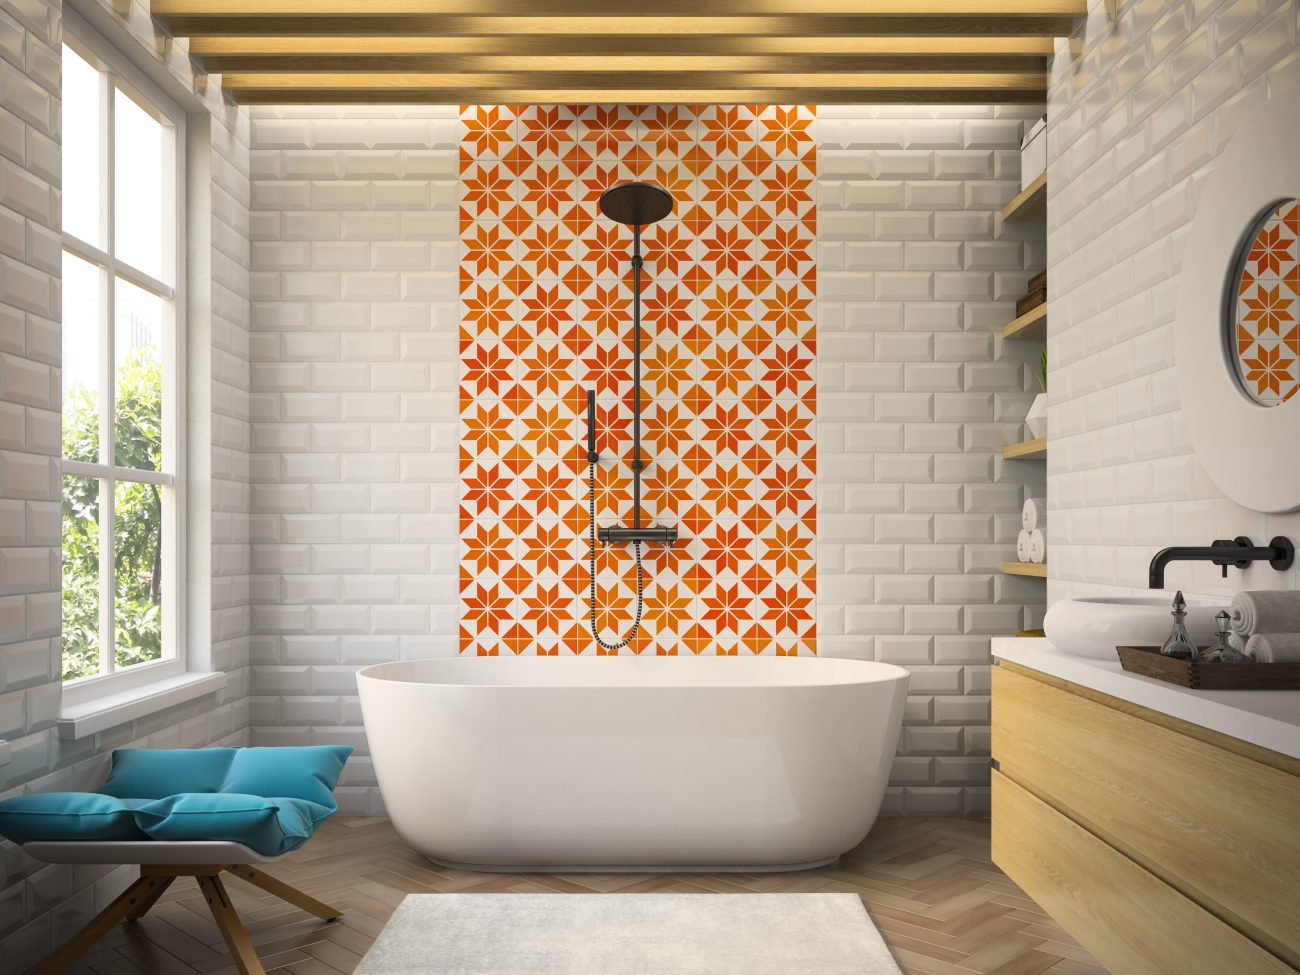 Bathroom in white brick, part of a wall in orange and white star-patterned tiles, oval bathtub, shower with black knob and low stool with blue cushion